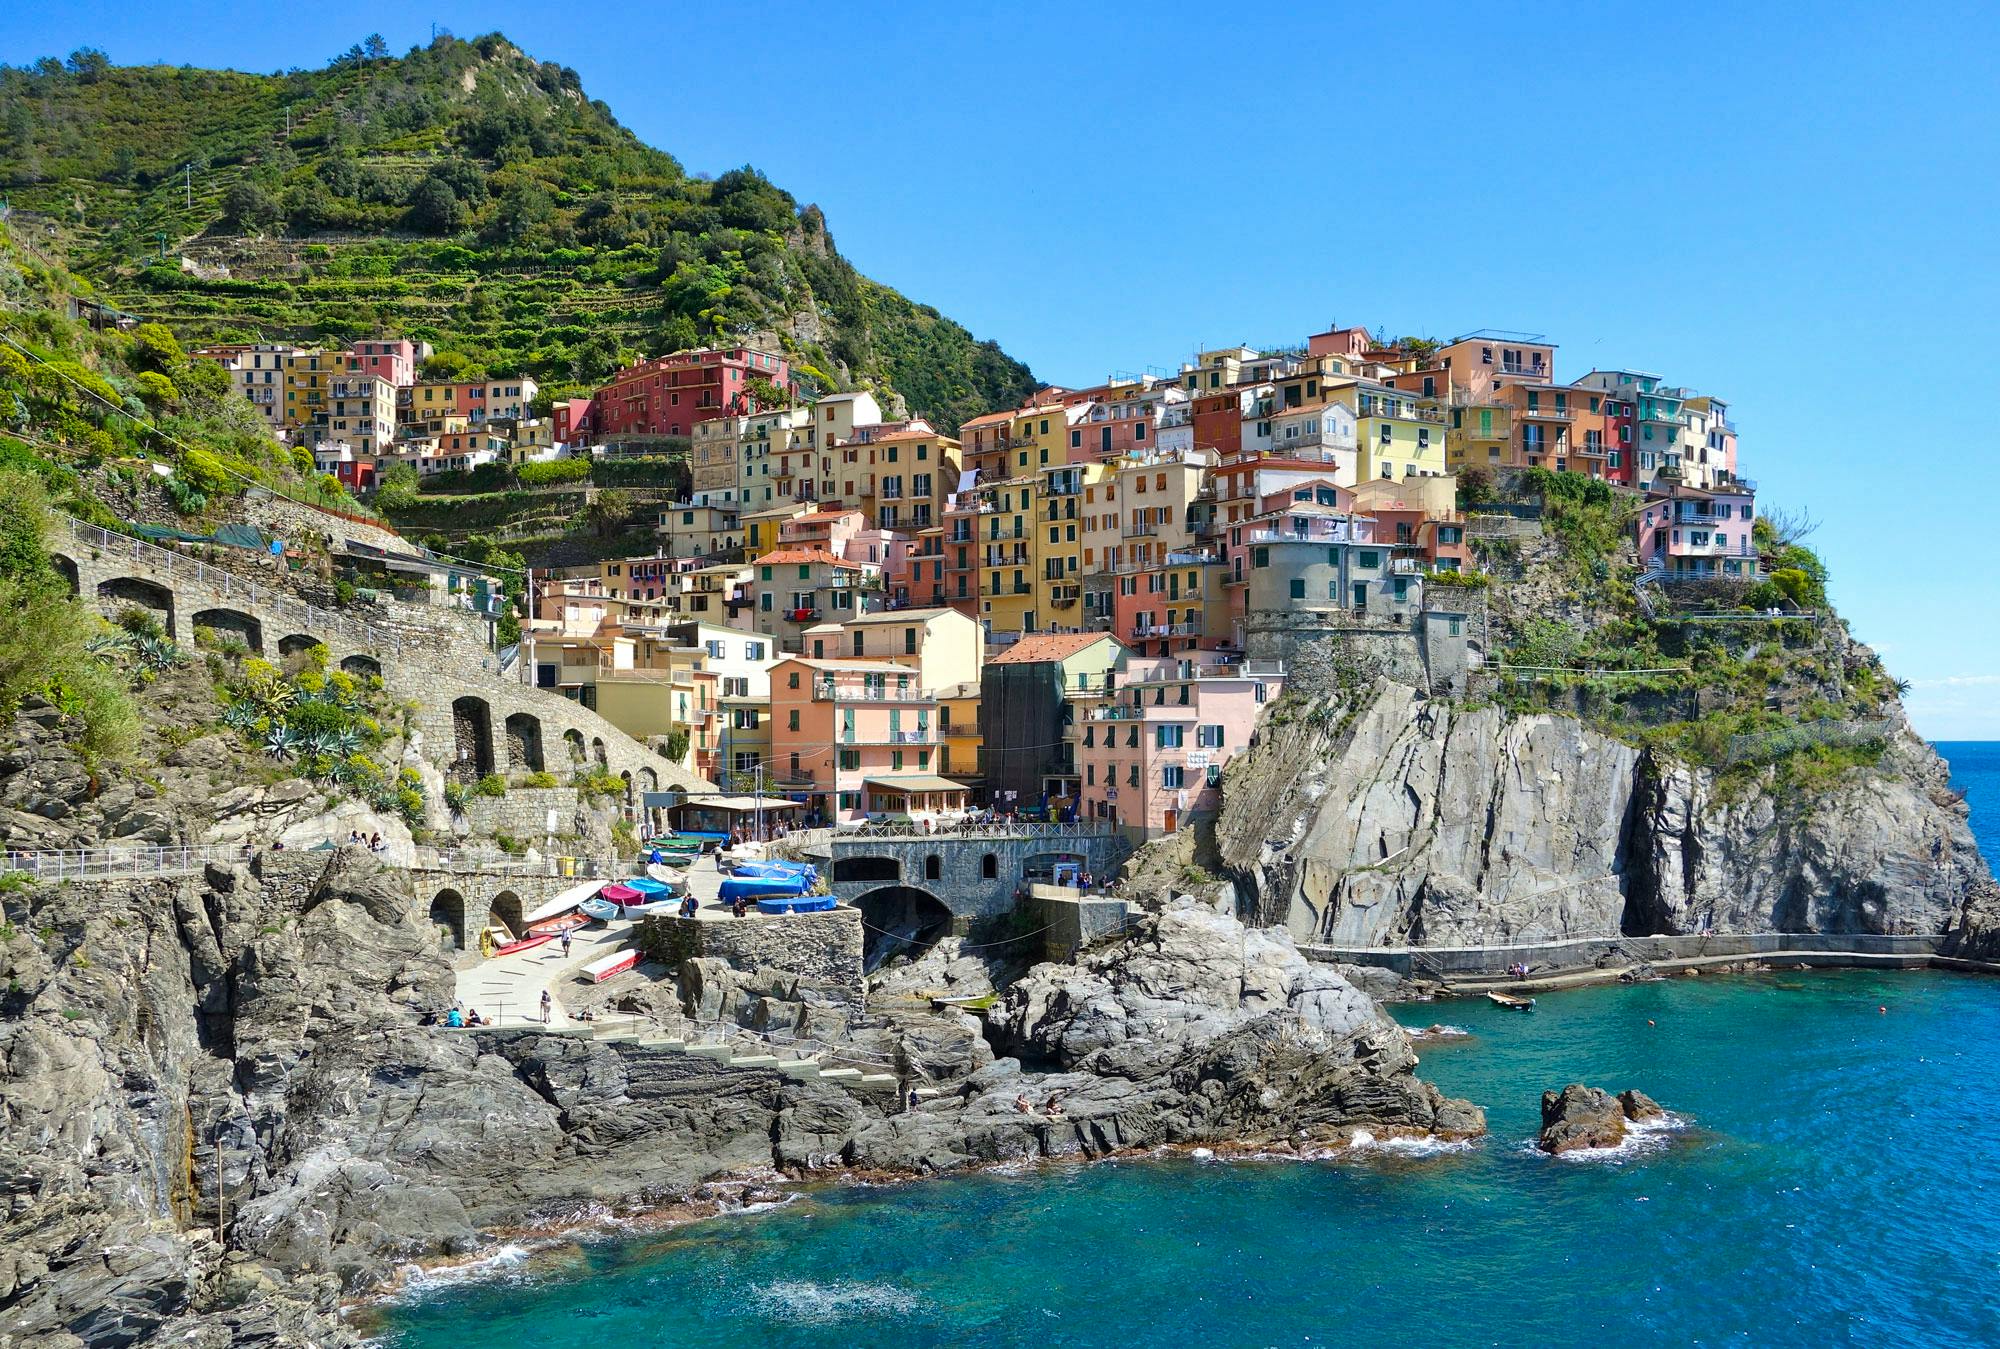 Cinque Terre An Introduction To The Five Towns Of Cinque Terre